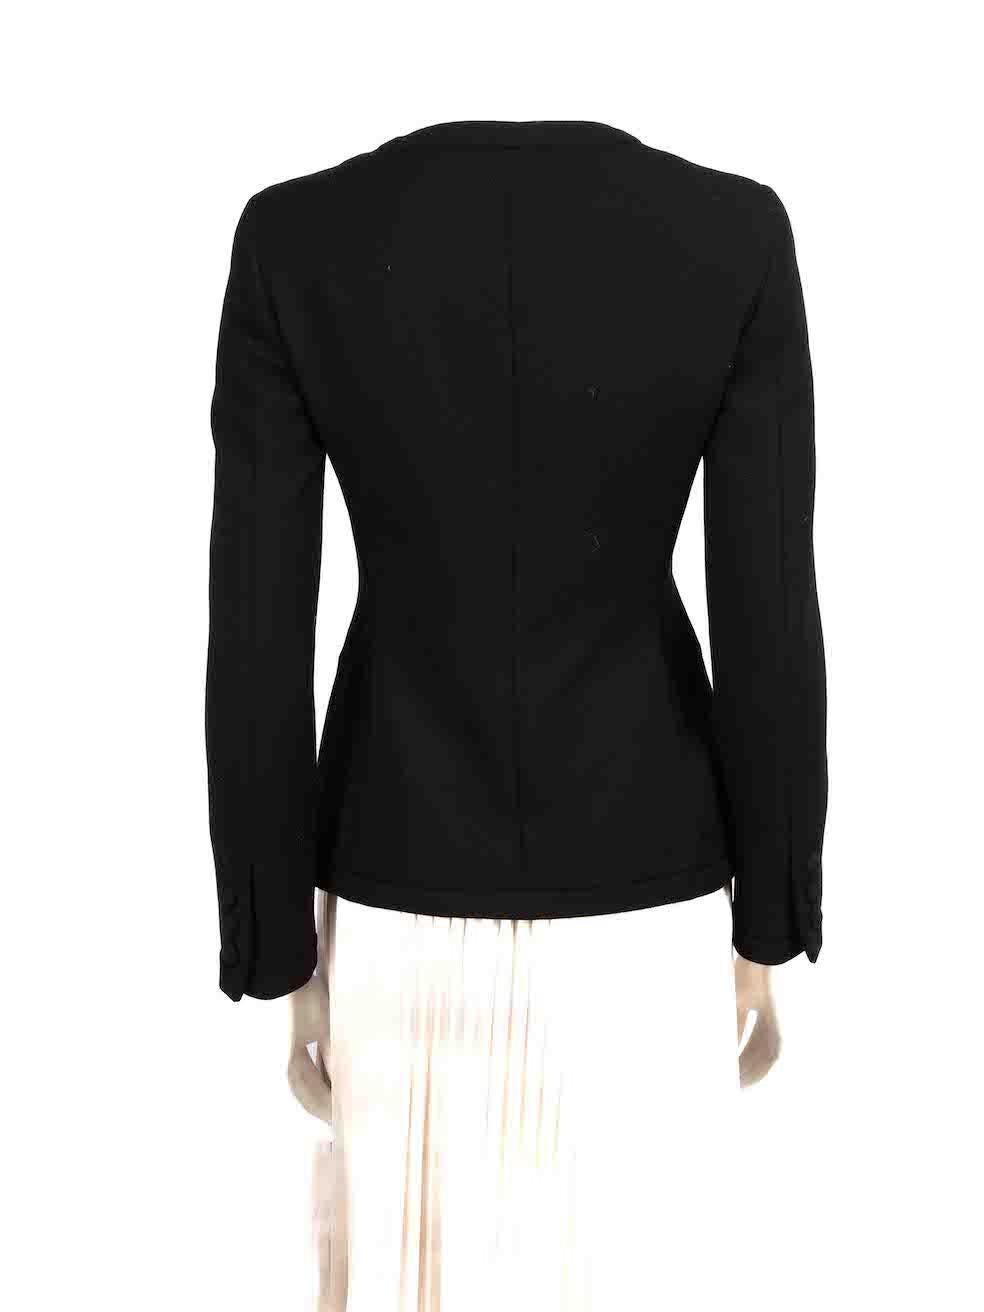 Moschino Moschino Cheap & Chic Black Chain Detail Jacket Size S In Good Condition In London, GB